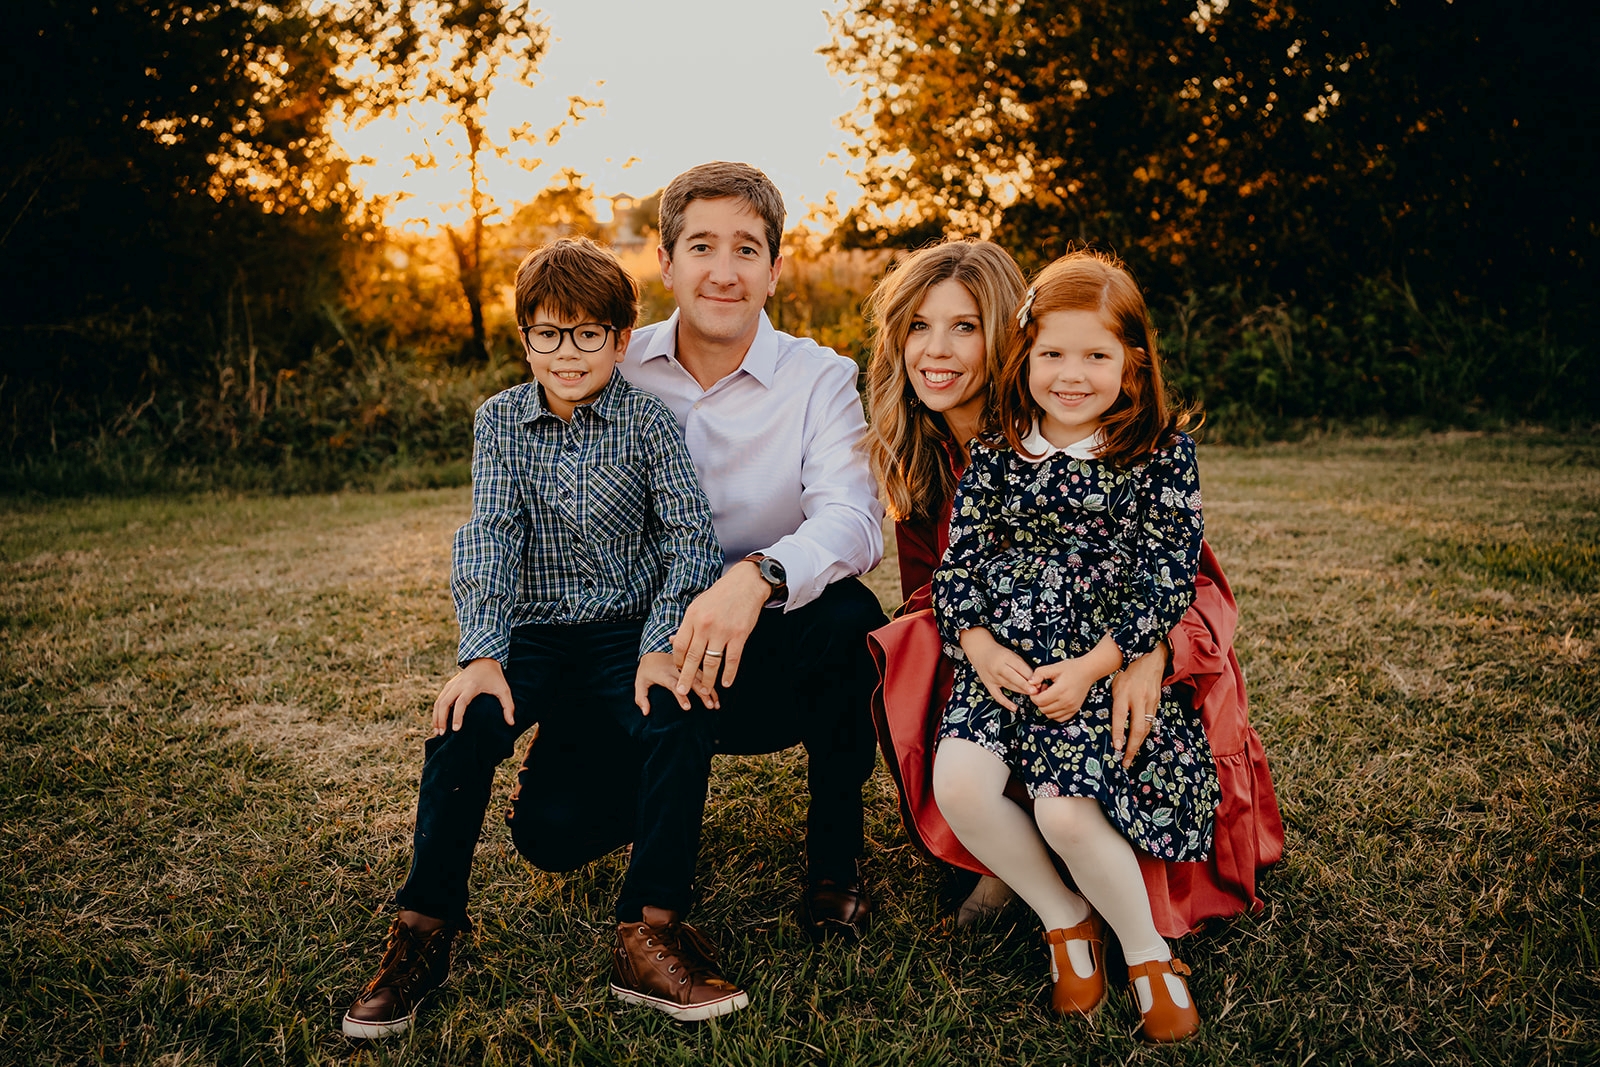 Prompt and Pose Ideas for Capturing Beautiful Family Photos